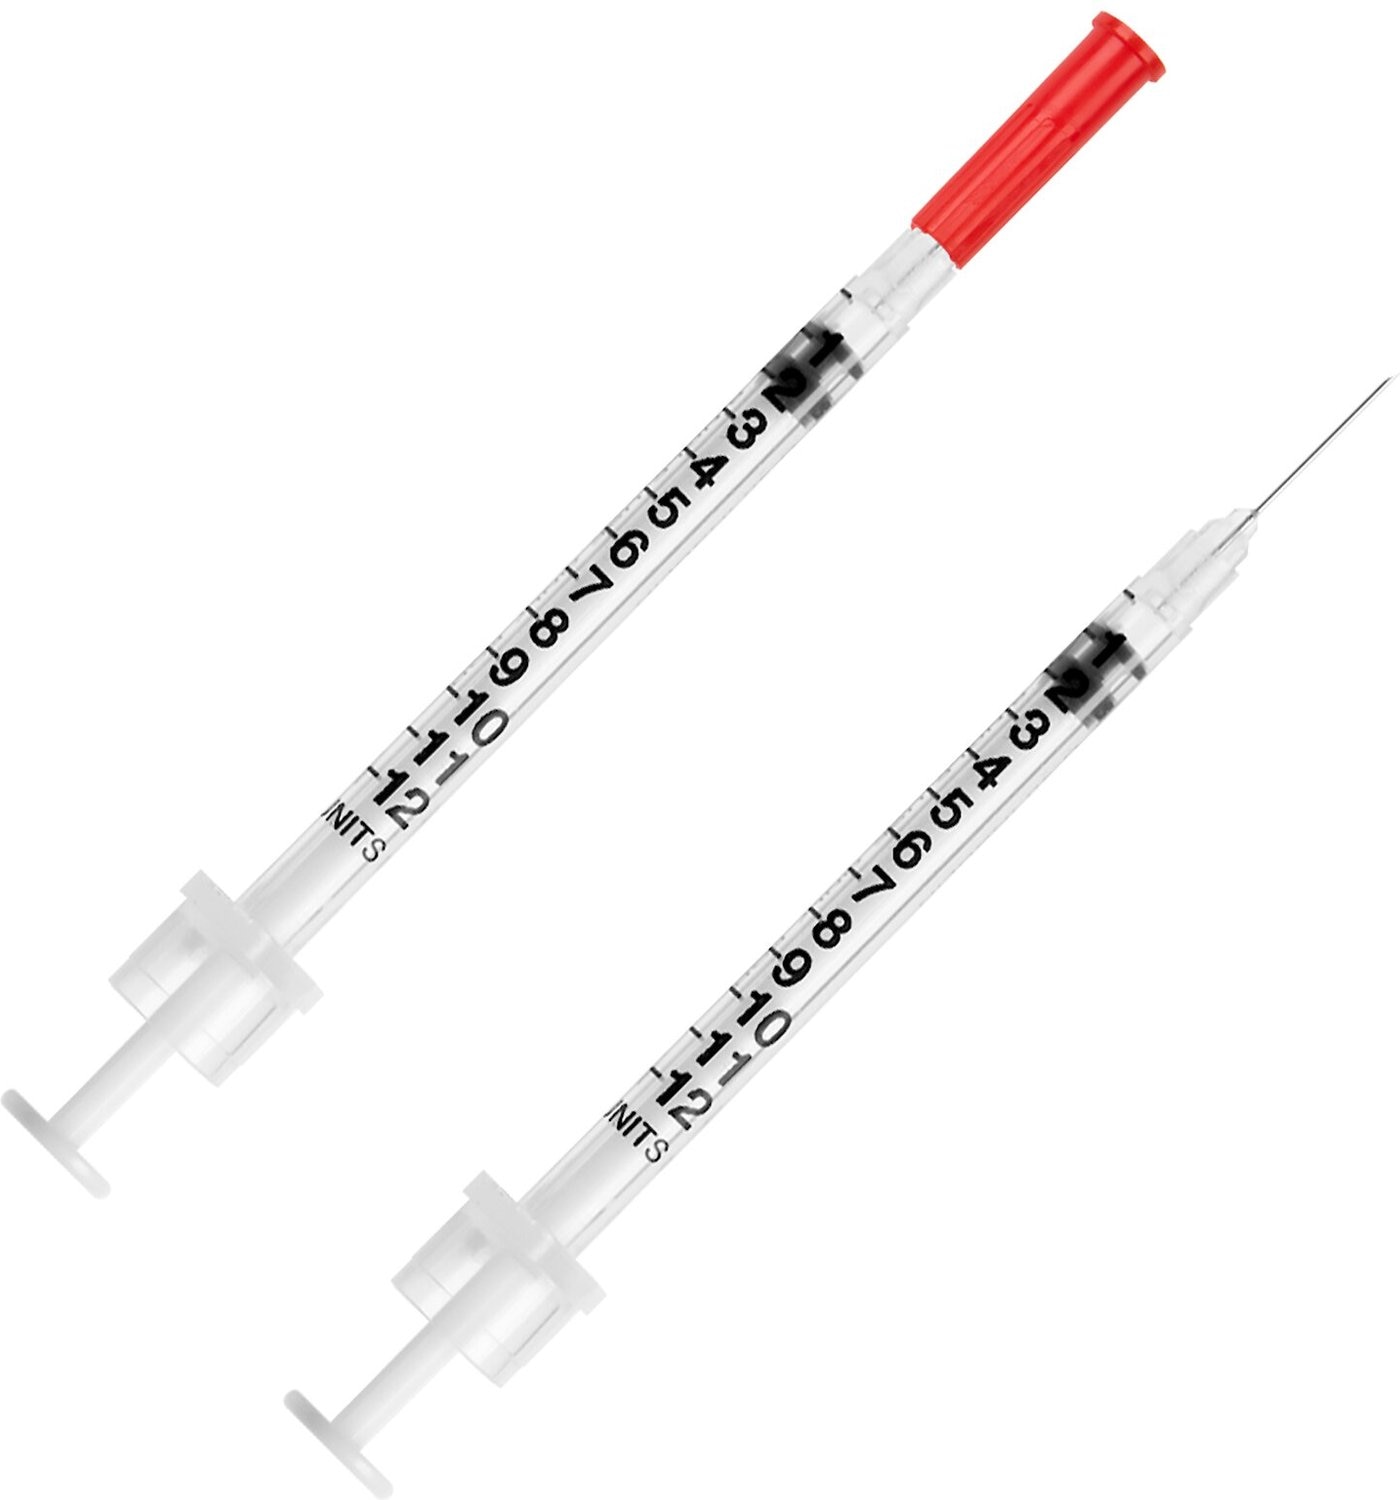 Types Of Insulin Syringes